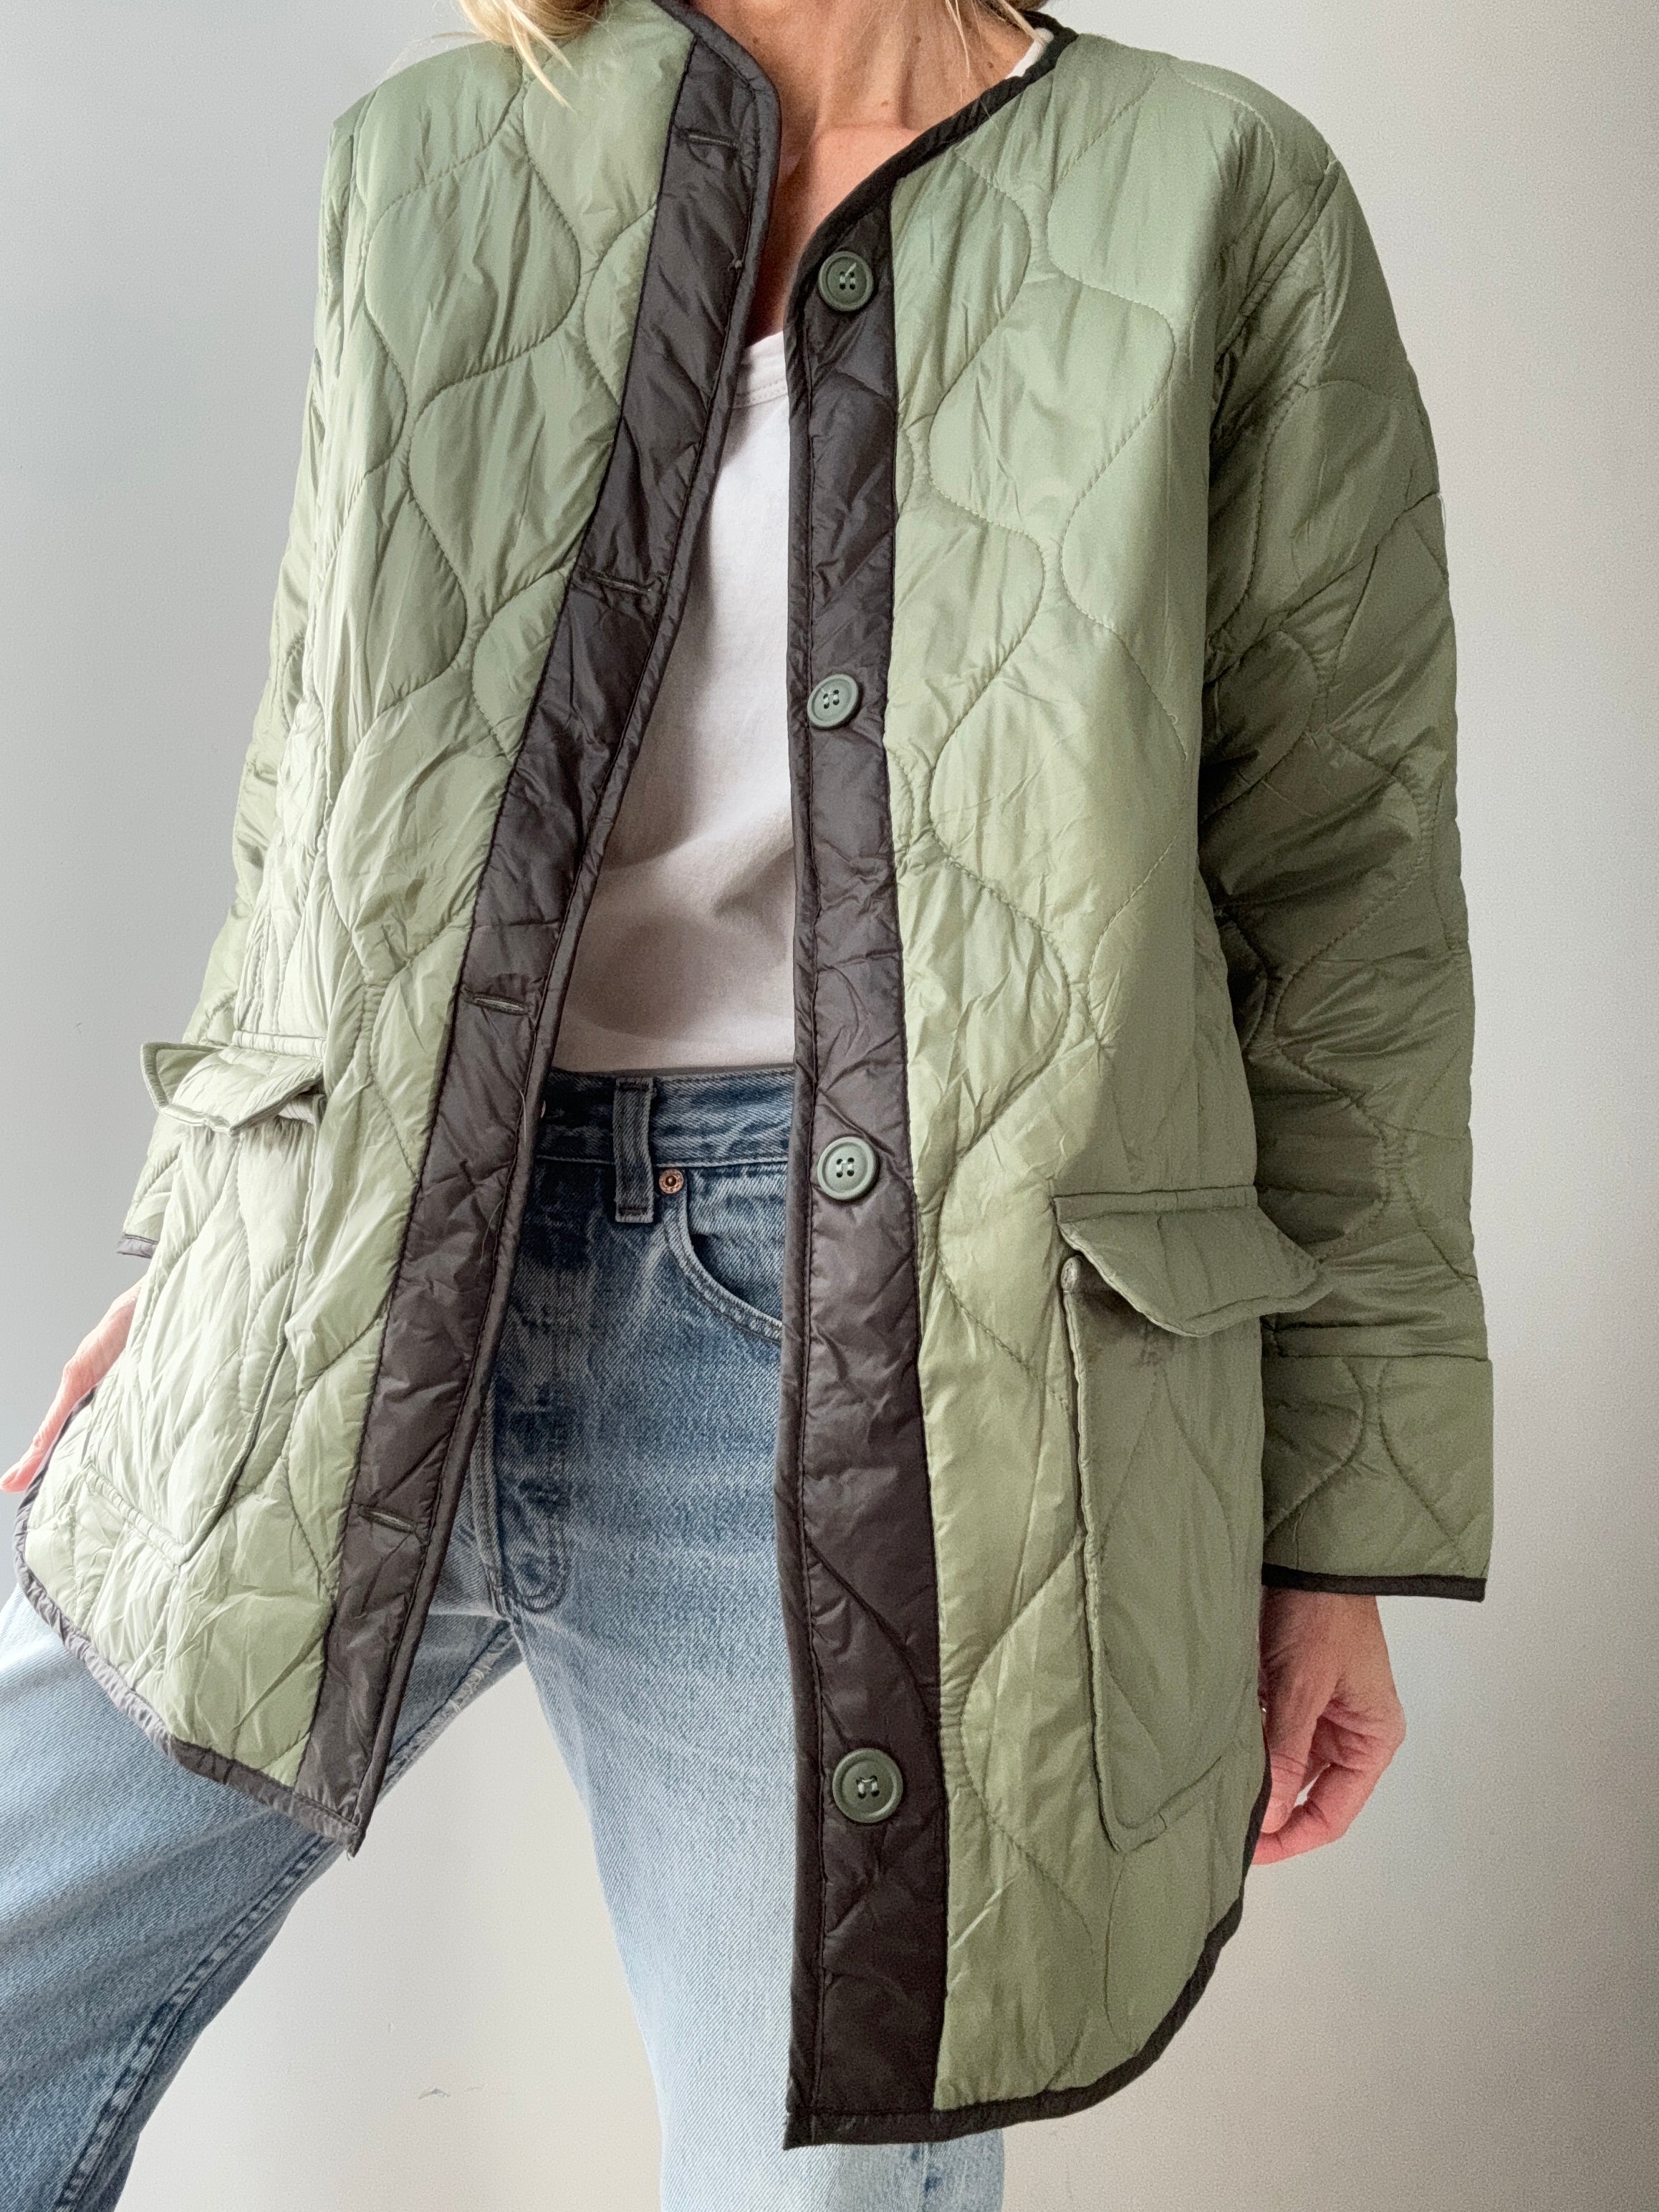 Future Nomads Jackets Medium Green Quilted Jacket